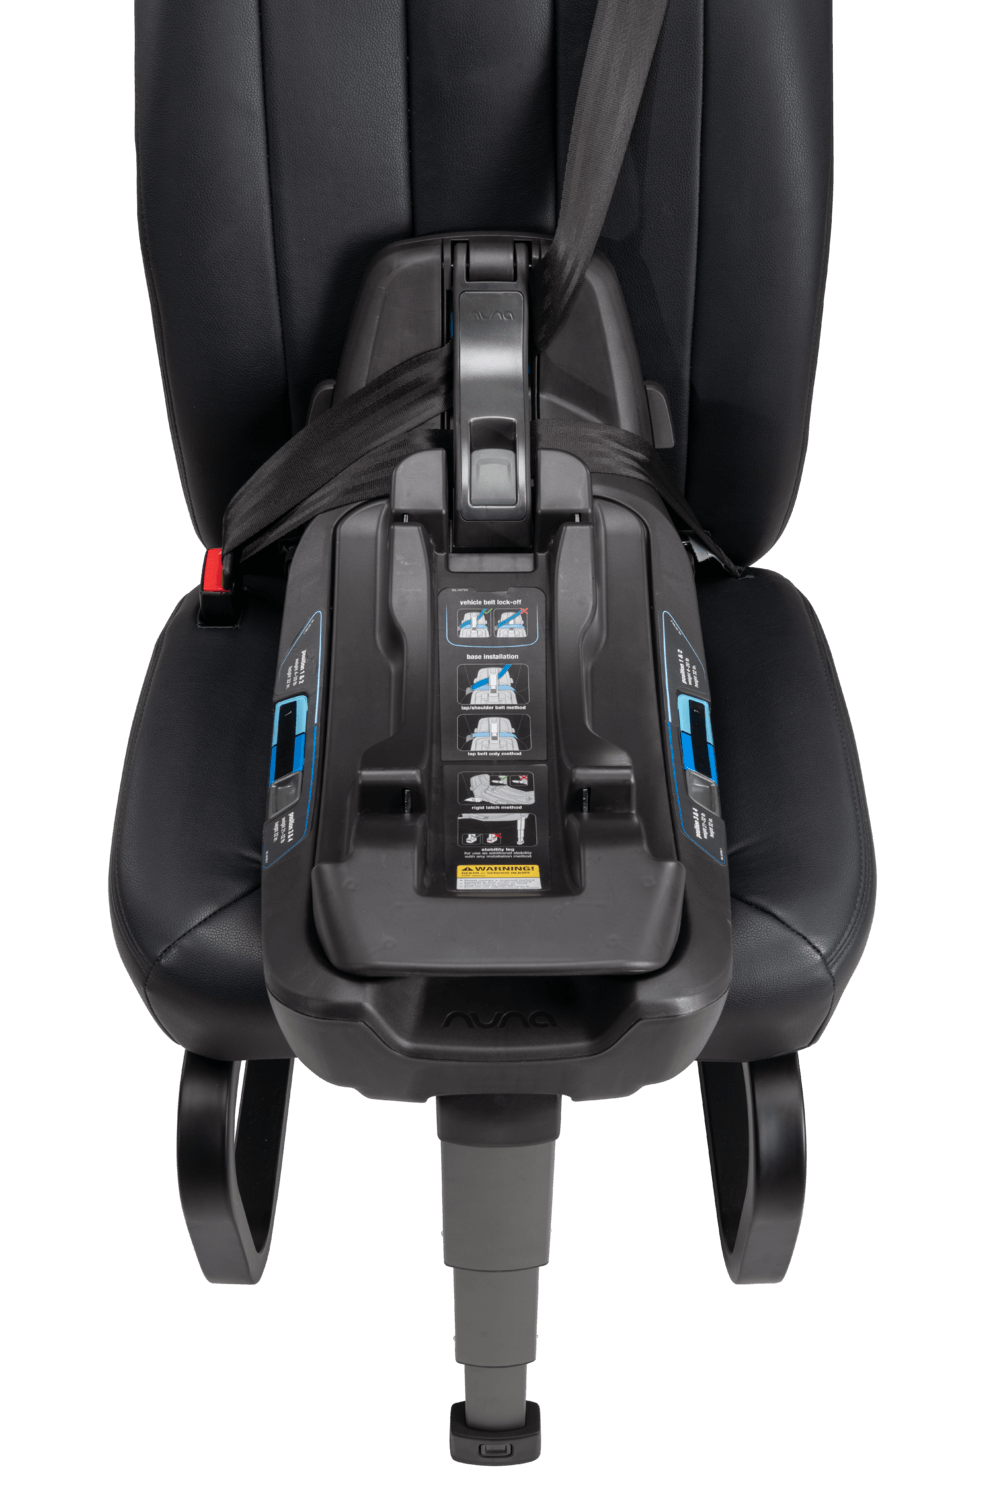 Nuna Pipa Lite RX Infant Car Seat With Relx Base - ANB Baby -$300 - $500